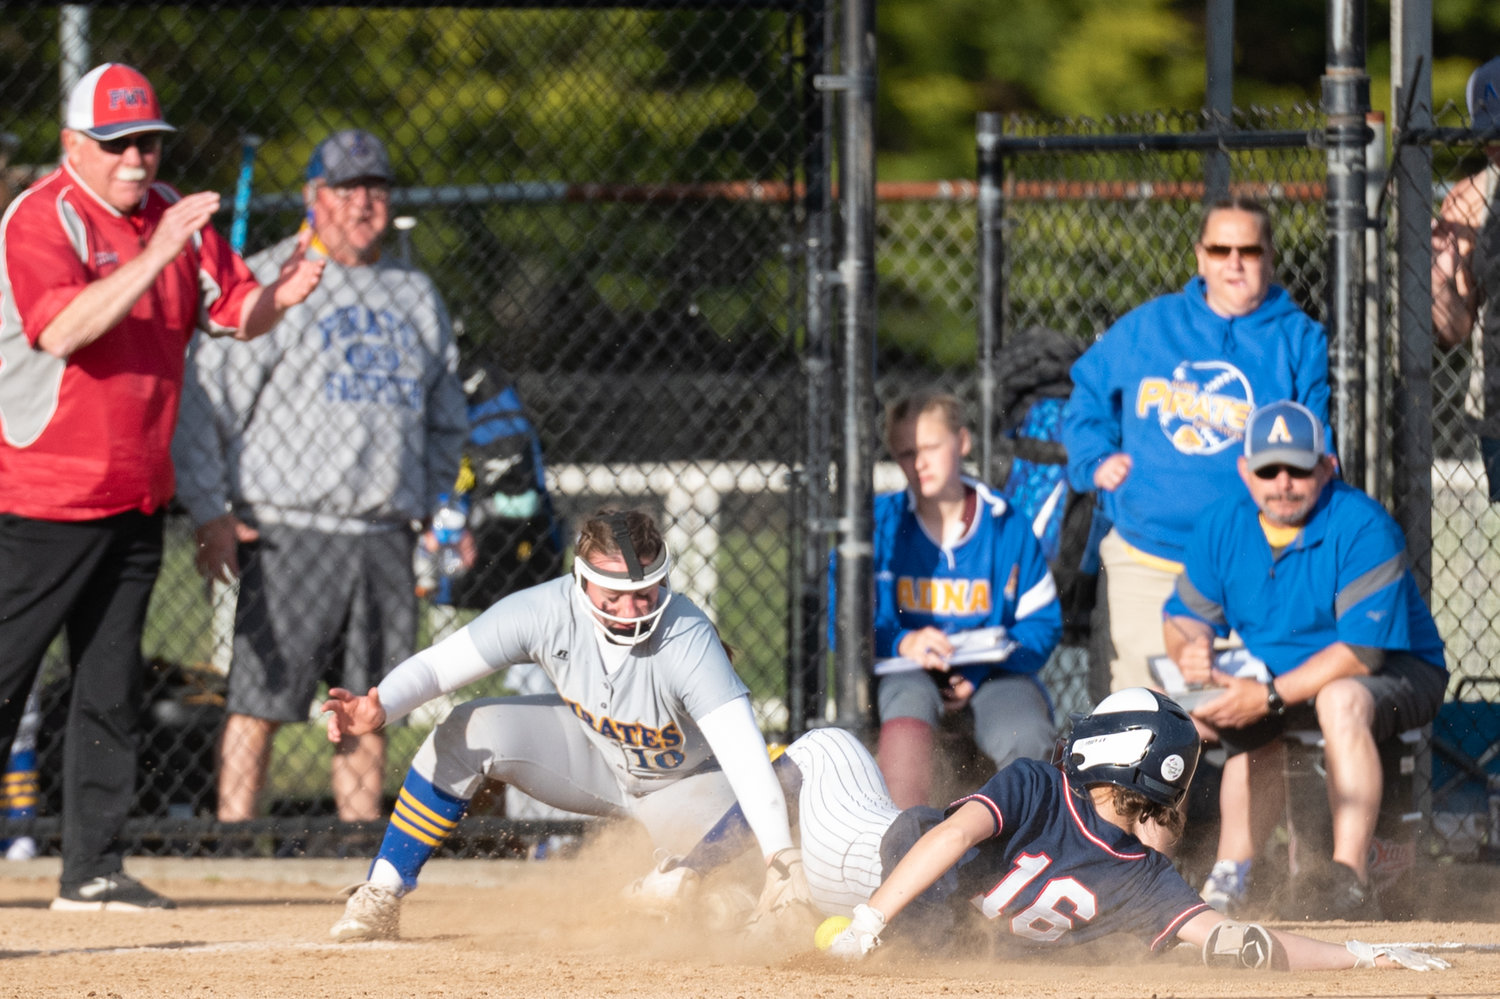 Adna third baseman Ashlee VonMoos can't hold on to a ball while PWV's Lauren Matlock slides into third in the 2B District 4 softball championship game at Fort Borst Park in Centralia May 21.